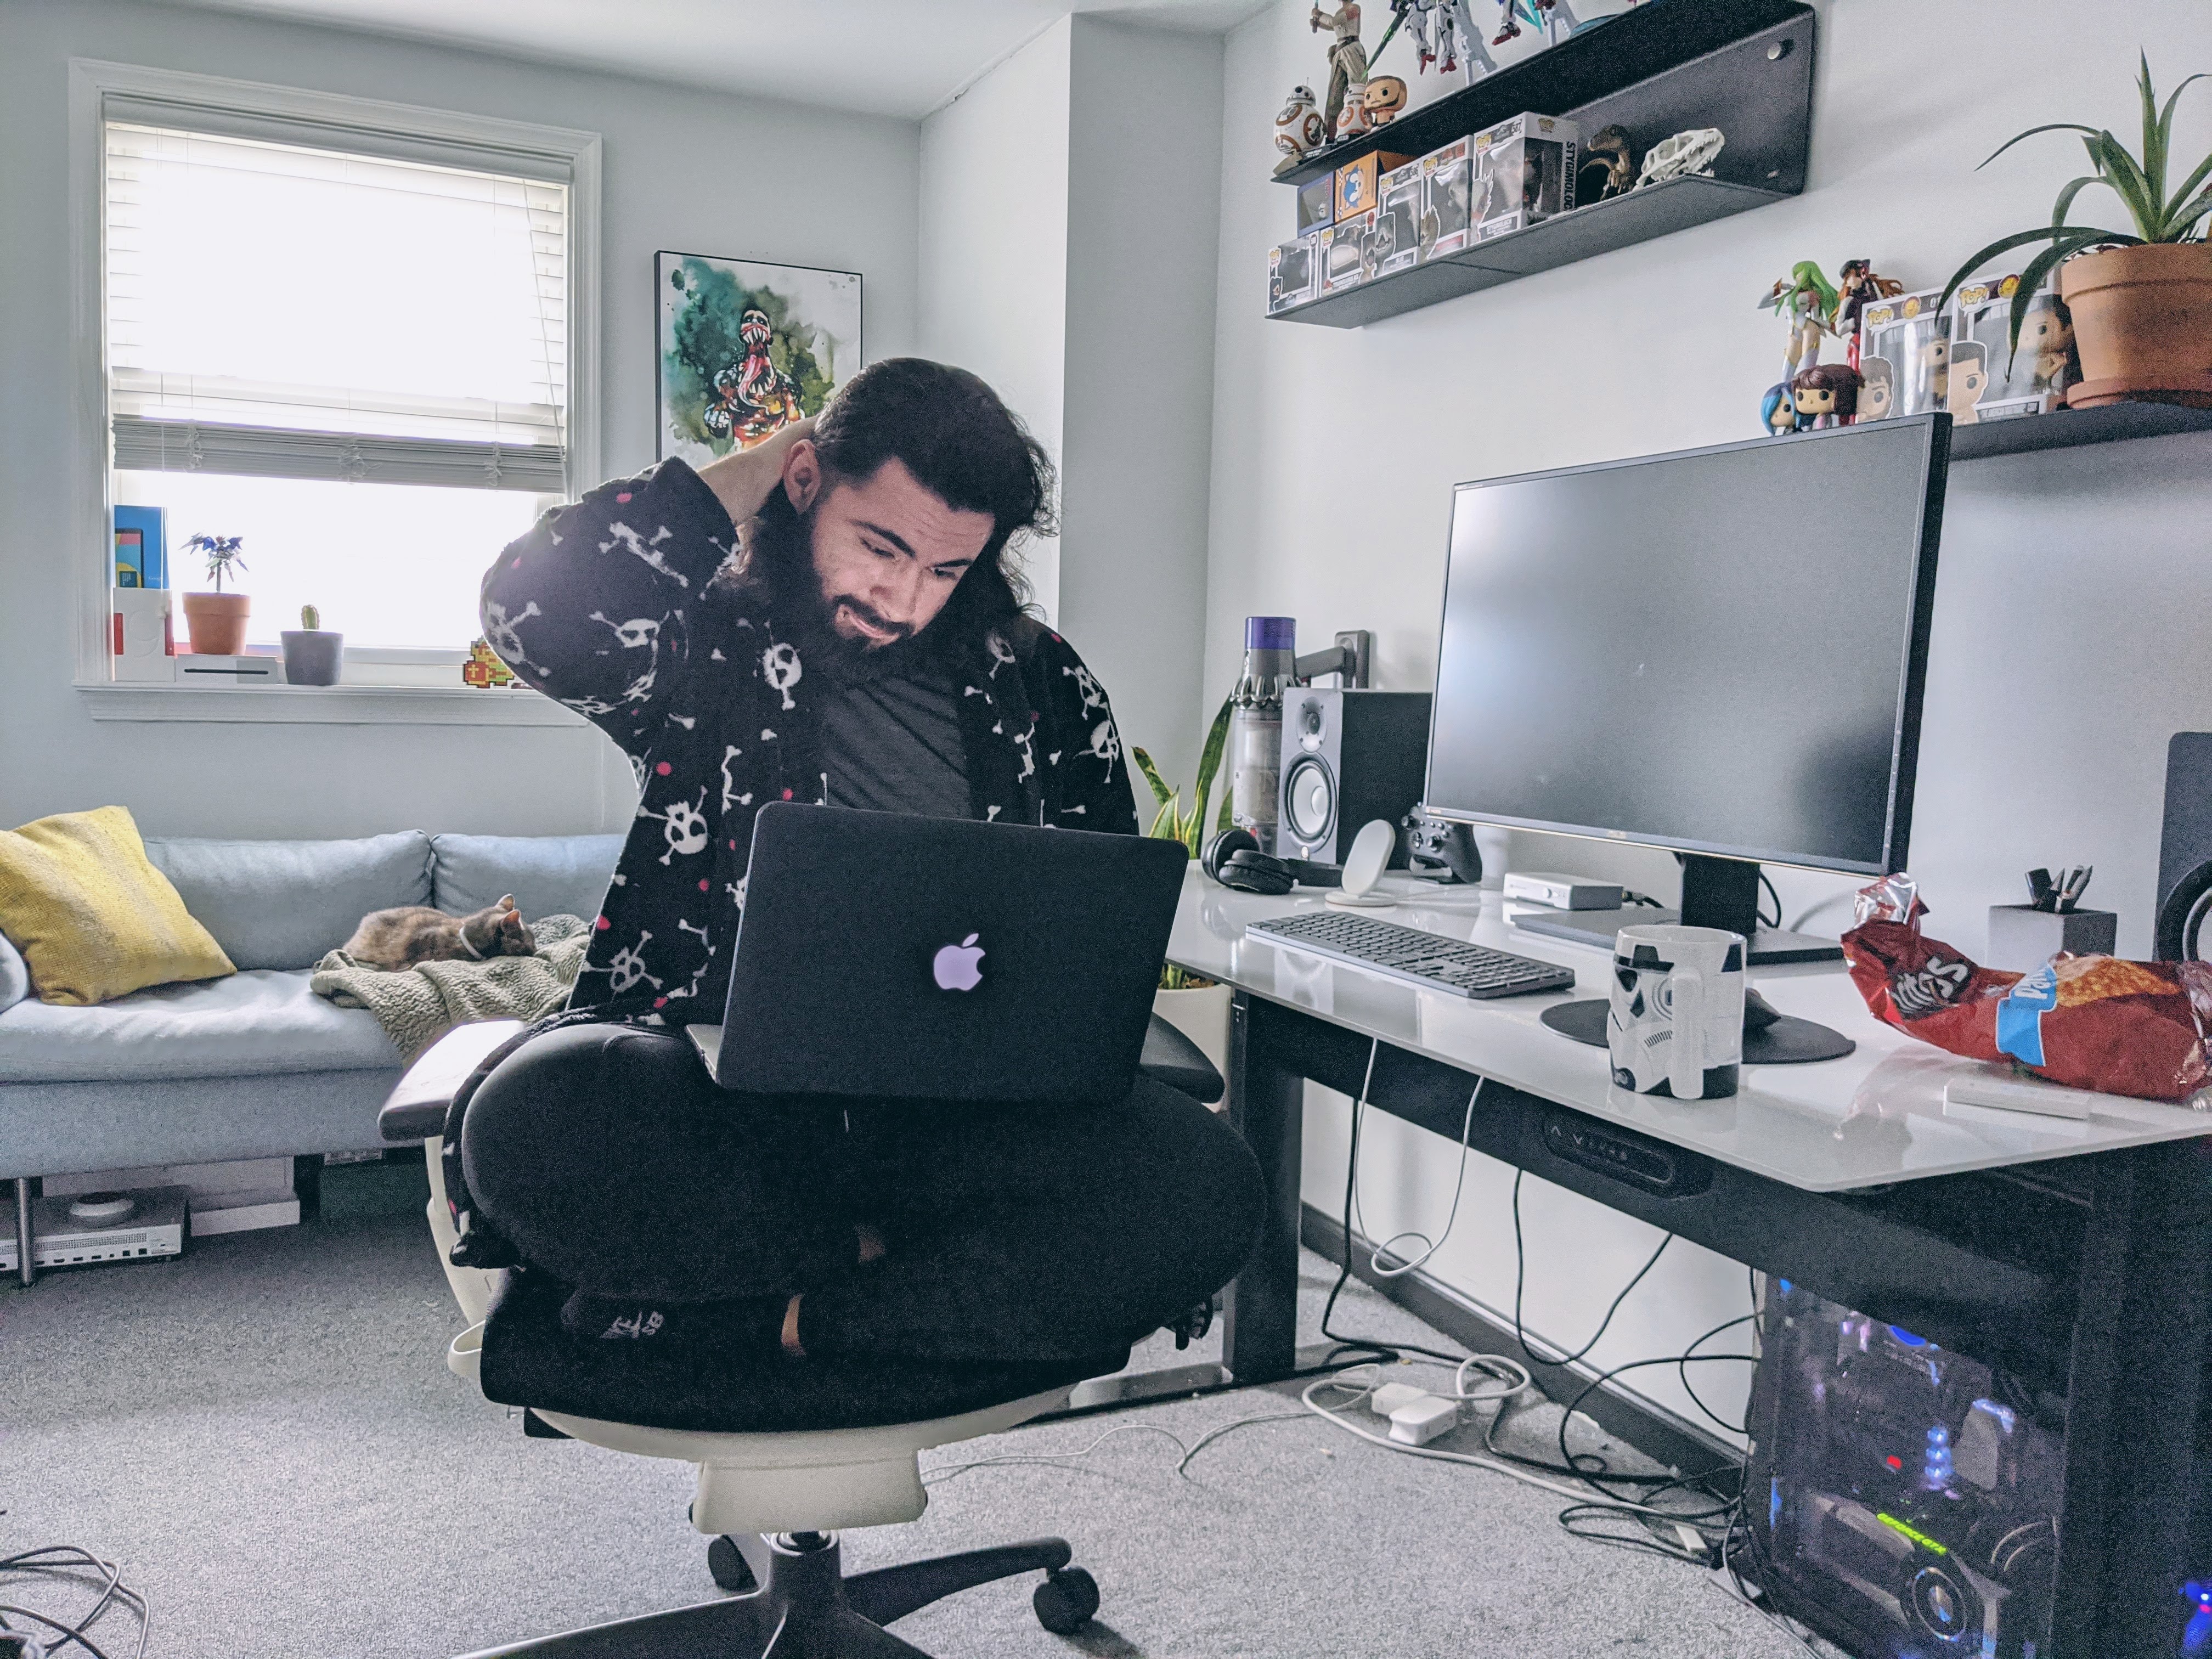 A man sits on a computer chair with a laptop